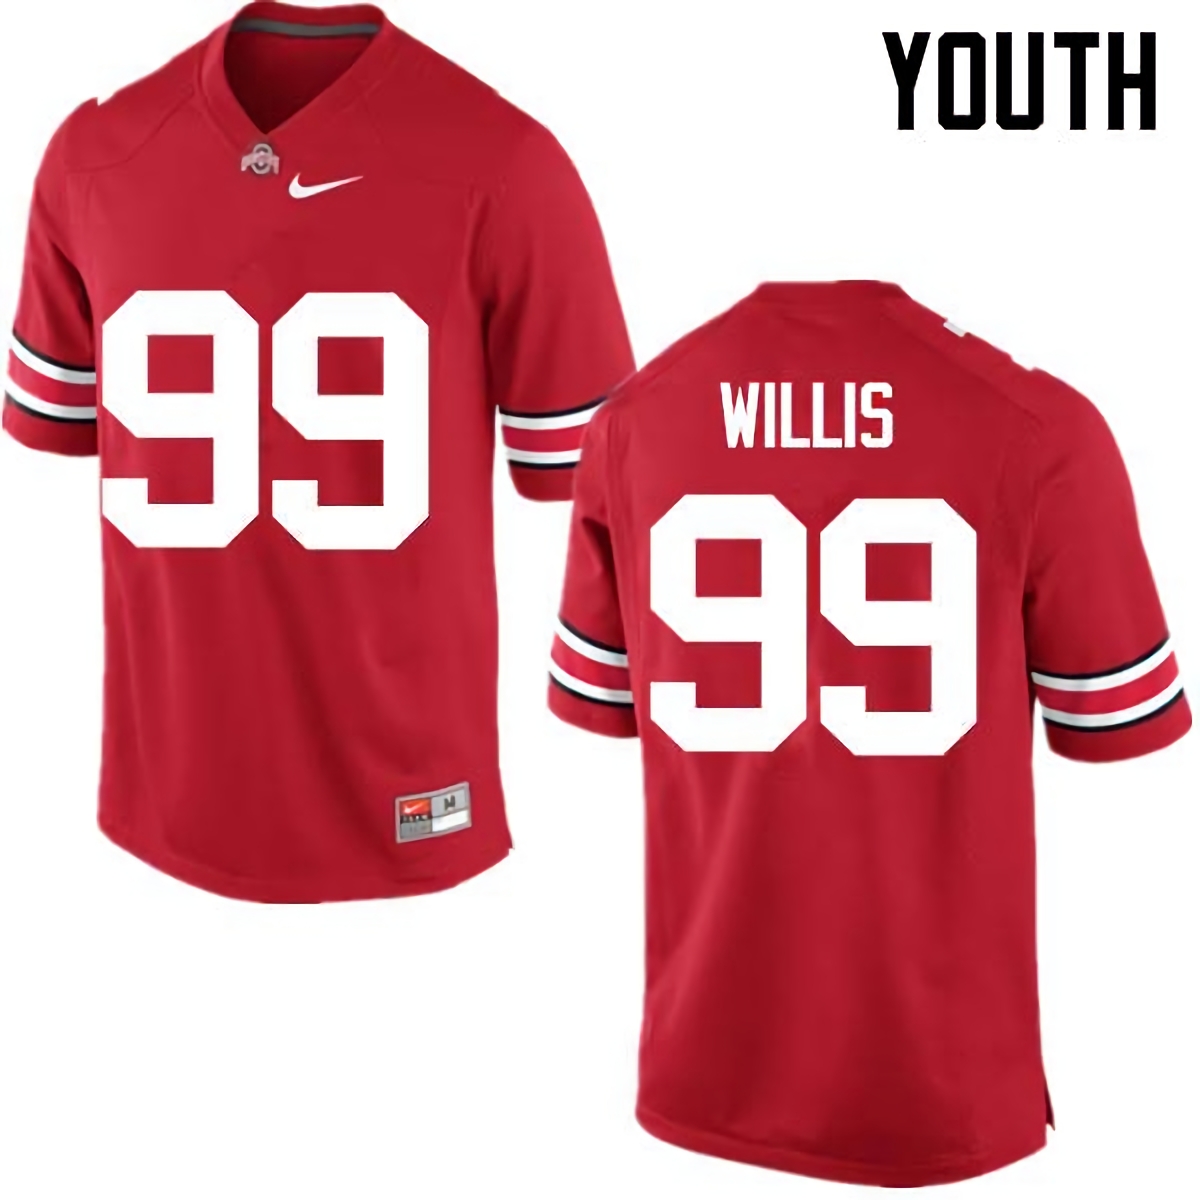 Bill Willis Ohio State Buckeyes Youth NCAA #99 Nike Red College Stitched Football Jersey CNW1256WD